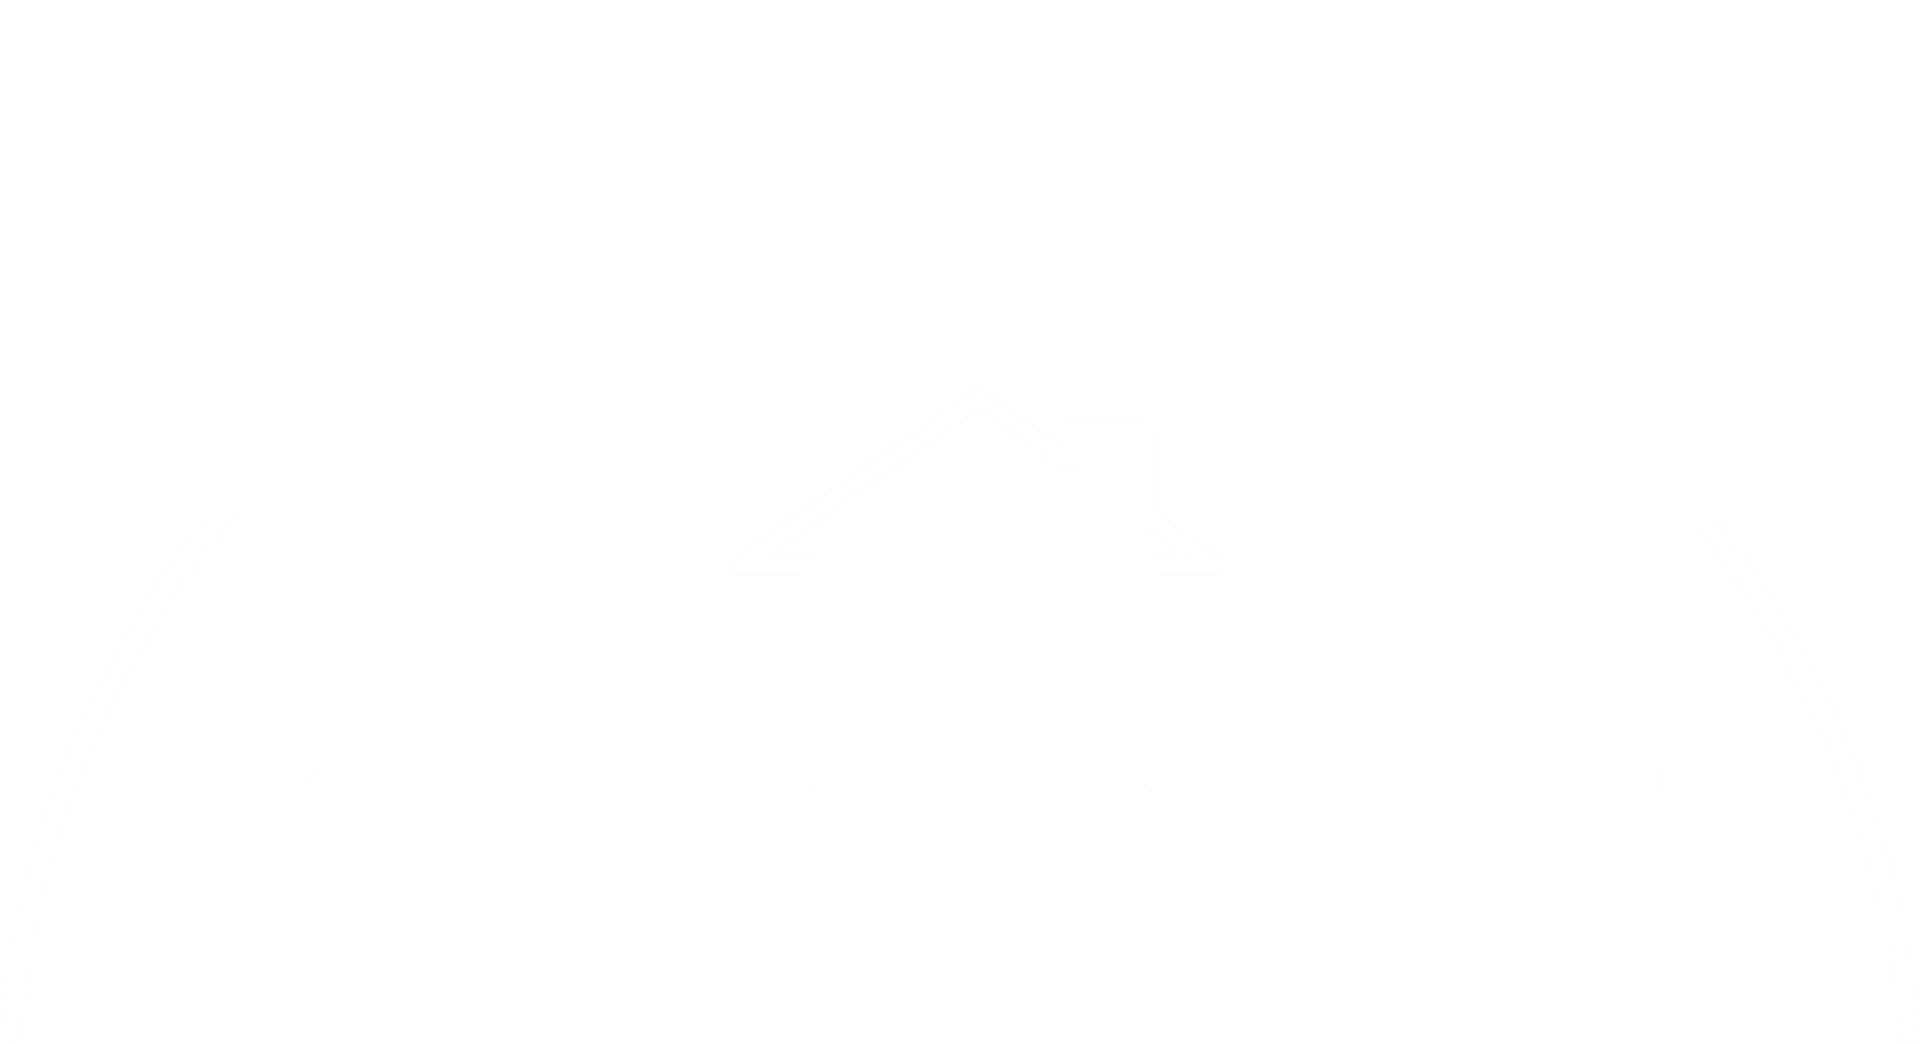 Anna's Cooking House